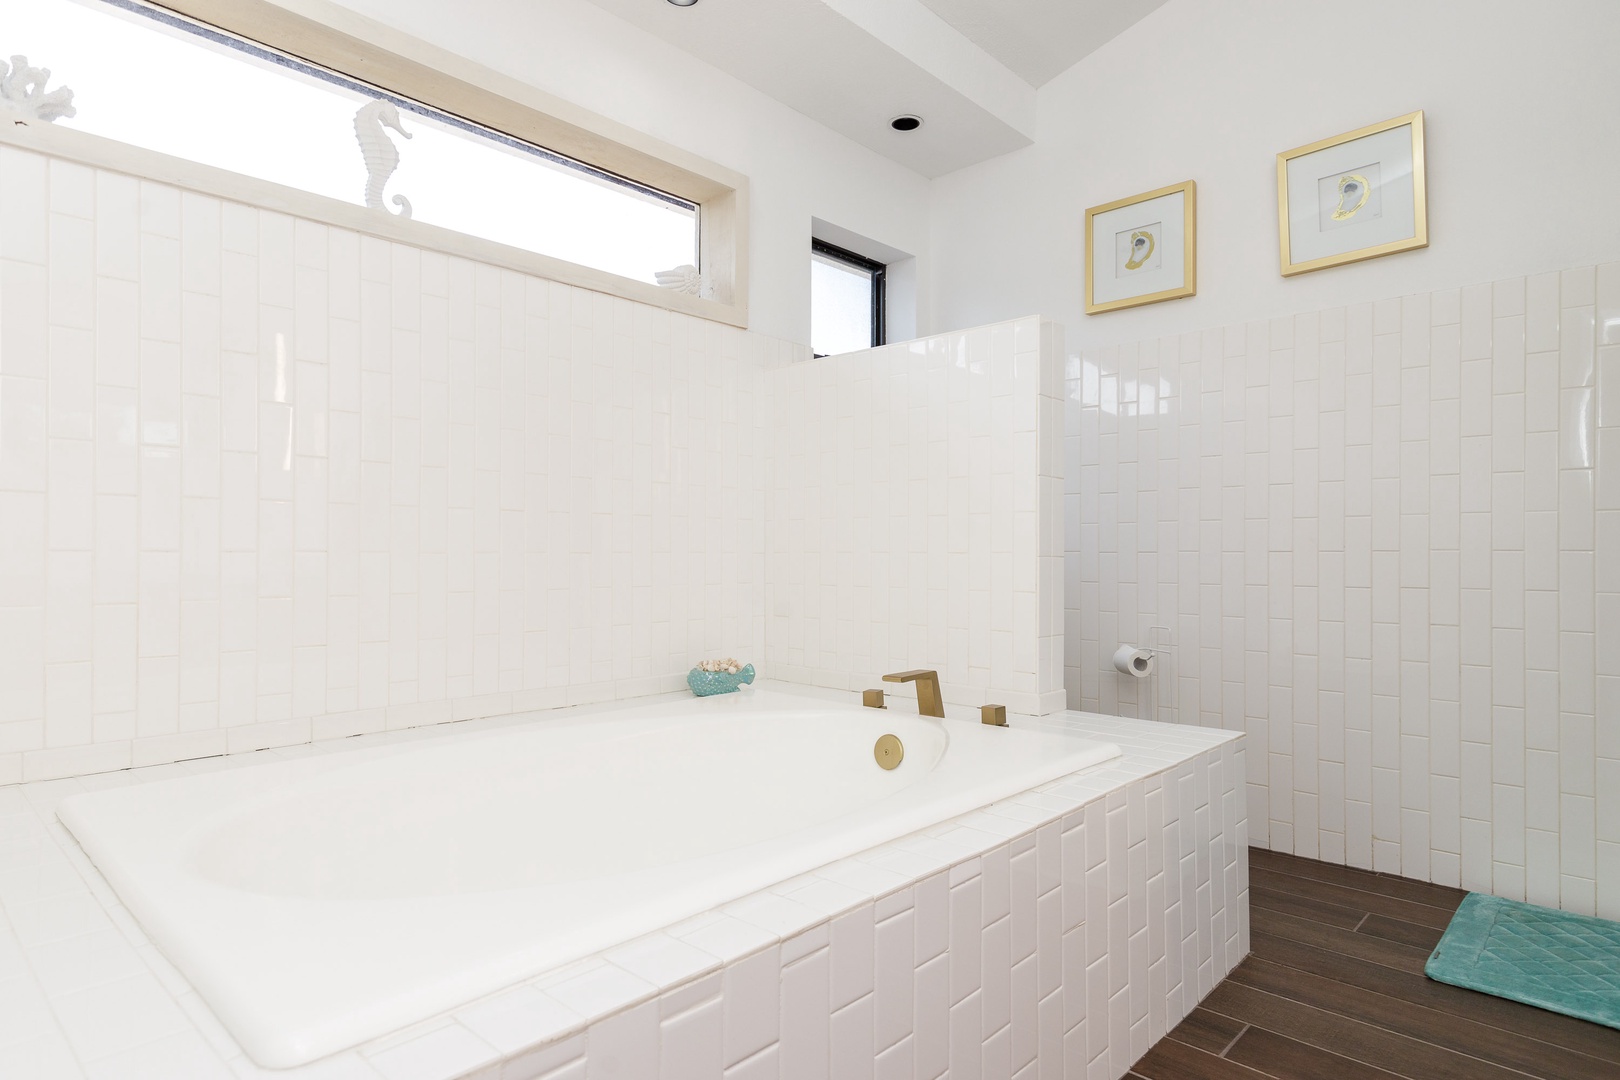 The king en suite offers a large single vanity, shower, & luxurious soaking tub